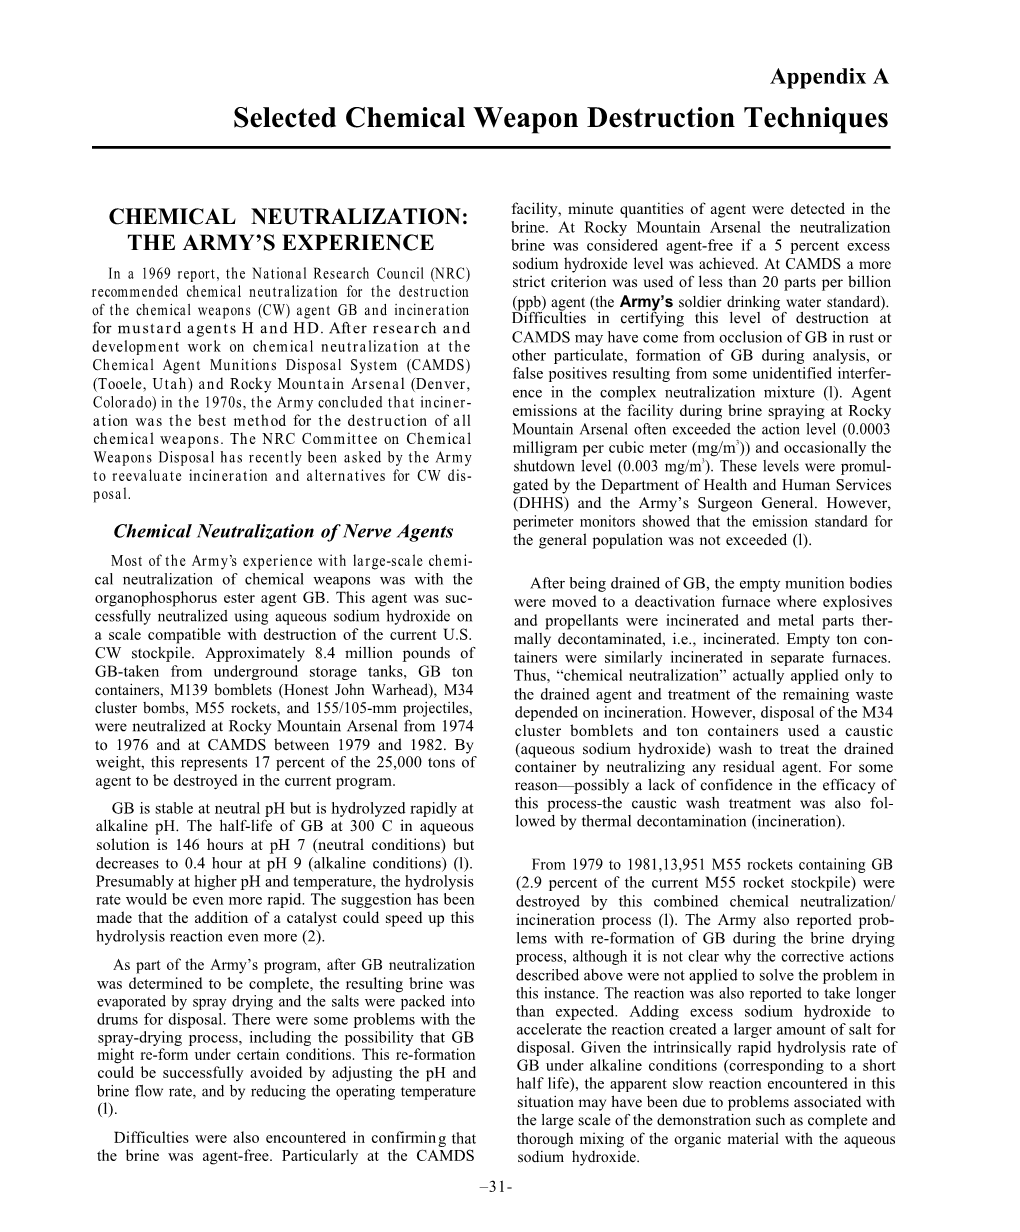 Disposal of Chemical Weapons: Alternative Technologies (Part 6 of 8)